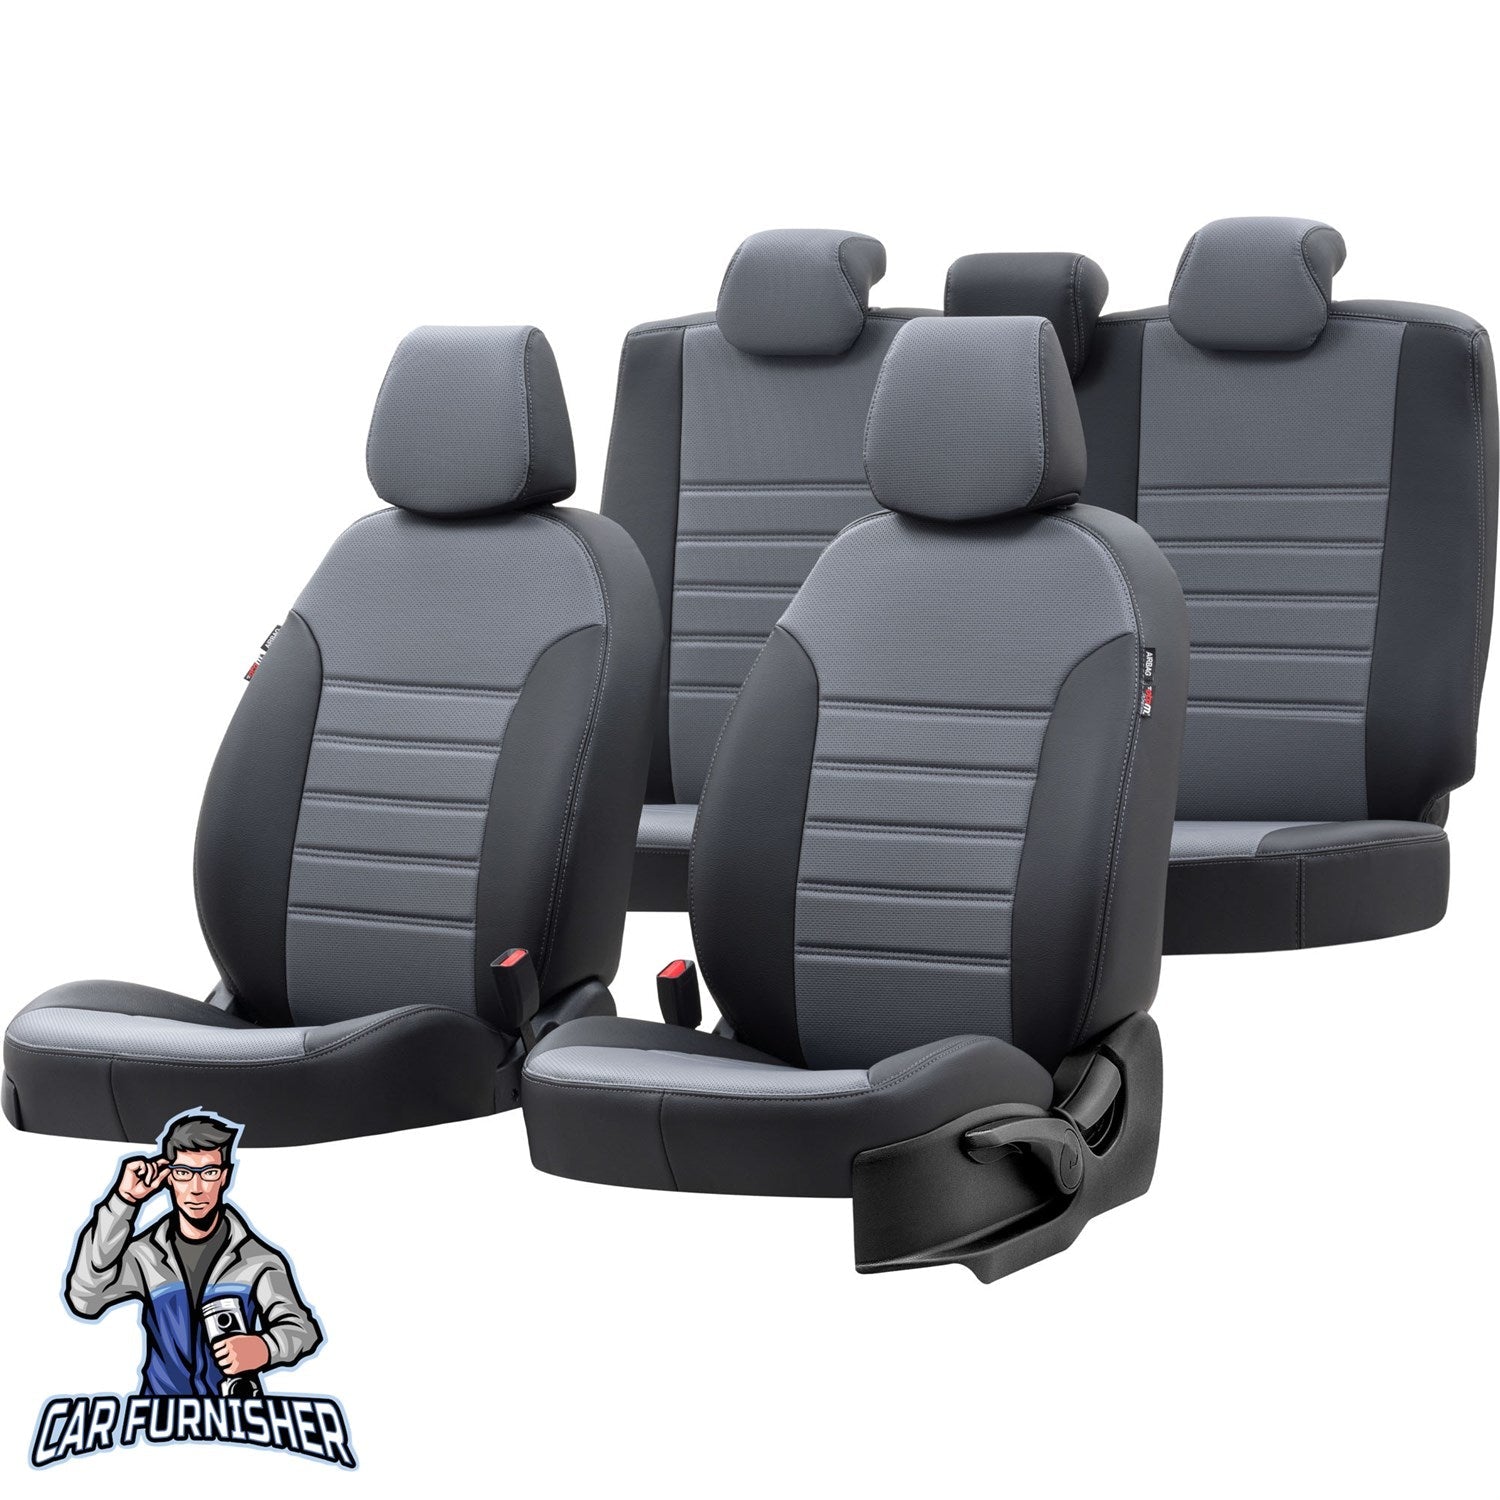 Volkswagen Scirocco Seat Cover New York Leather Design Smoked Black Leather